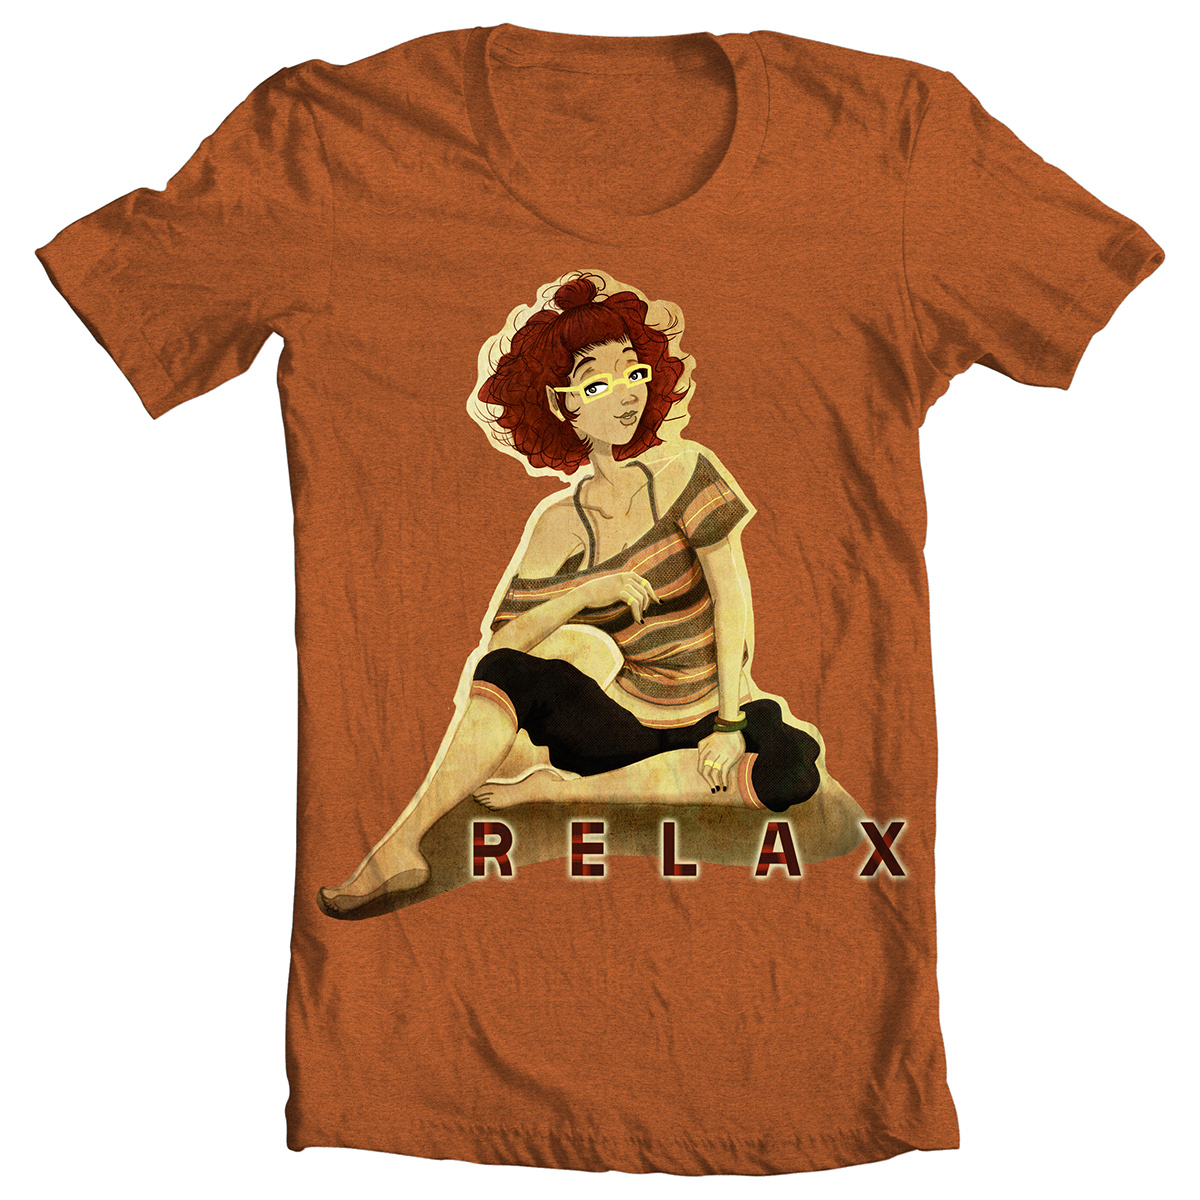 relax relaxation calm warm colors reading urban design pajamas sexy cool curly hair woman textures